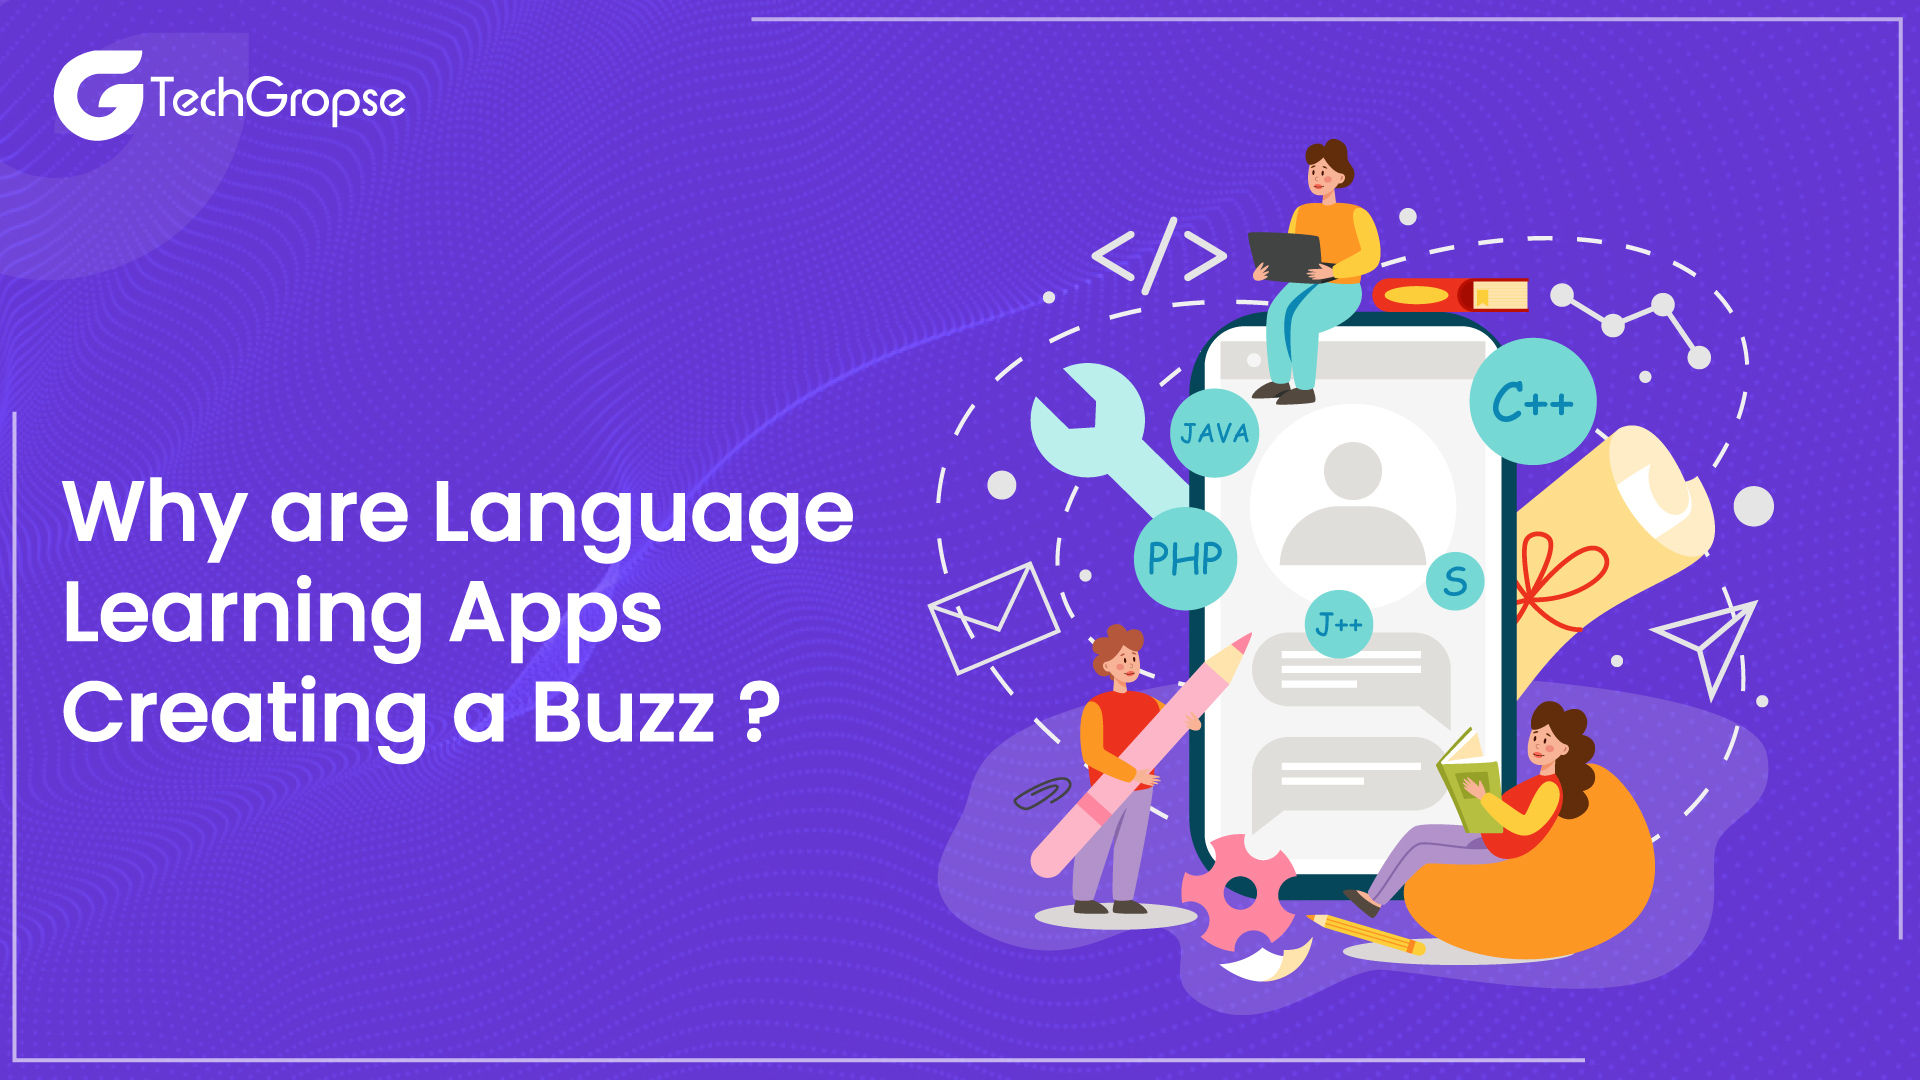 Why are Language Learning Apps Creating a Buzz?